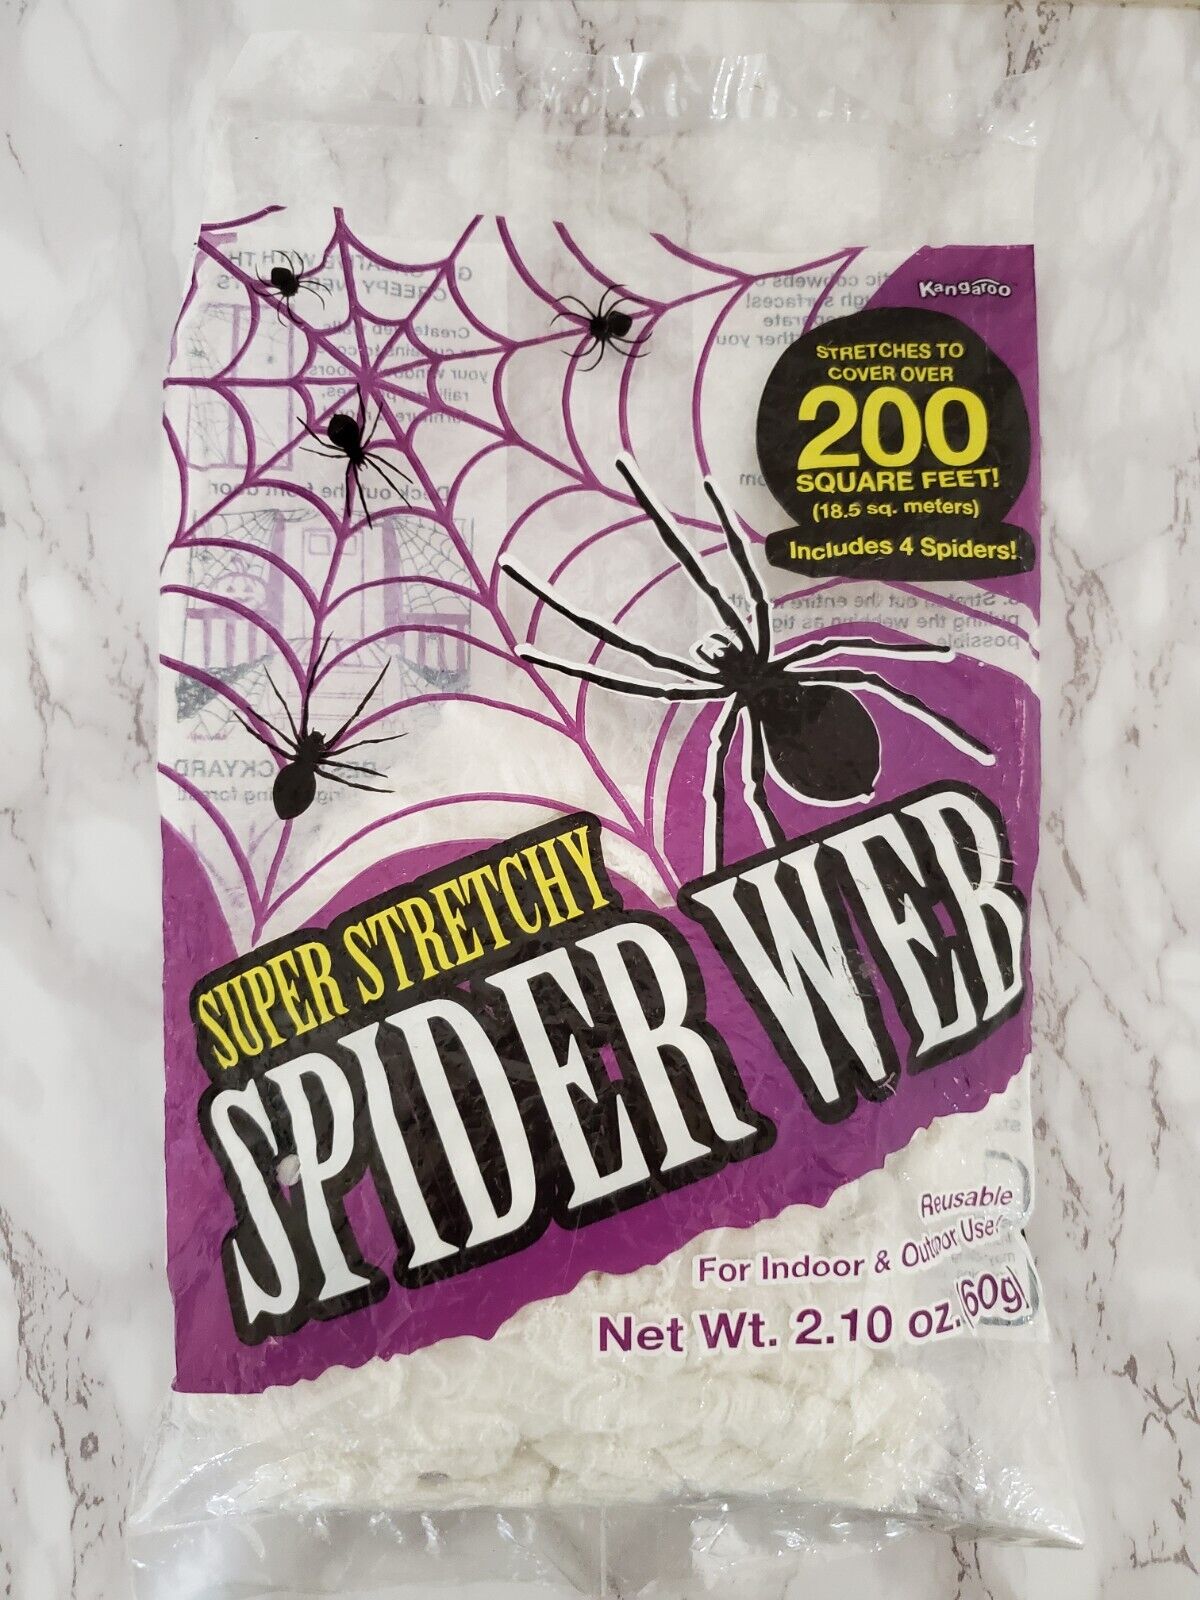 Kangaroo Super Stretchy Spider Web indoor / Outdoor 200 sq ft Ships Free